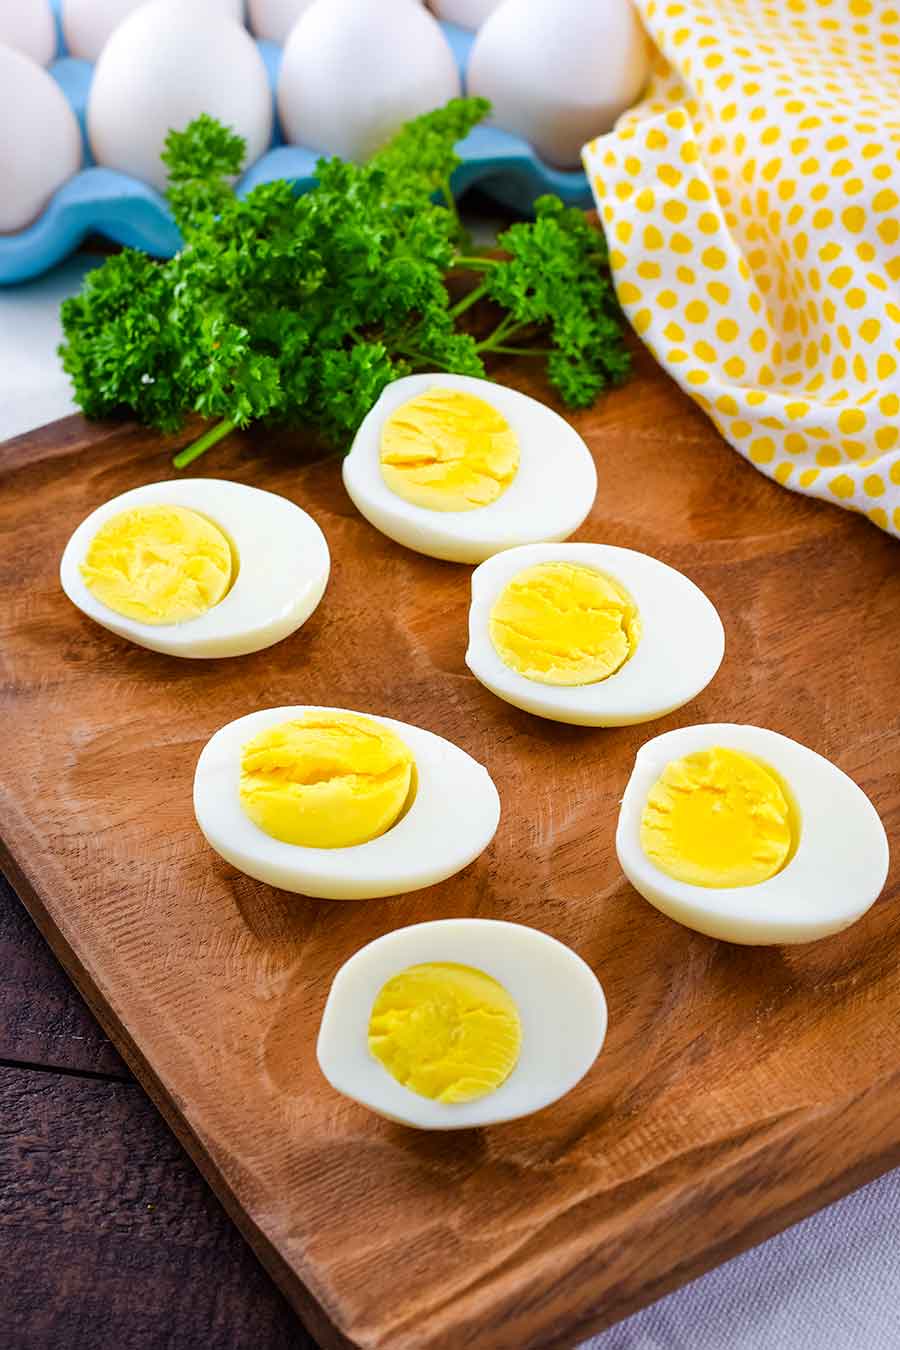 https://www.soulfullymade.com/wp-content/uploads/2019/04/Perfect-Instant-Pot-Hard-Boiled-Eggs.jpg